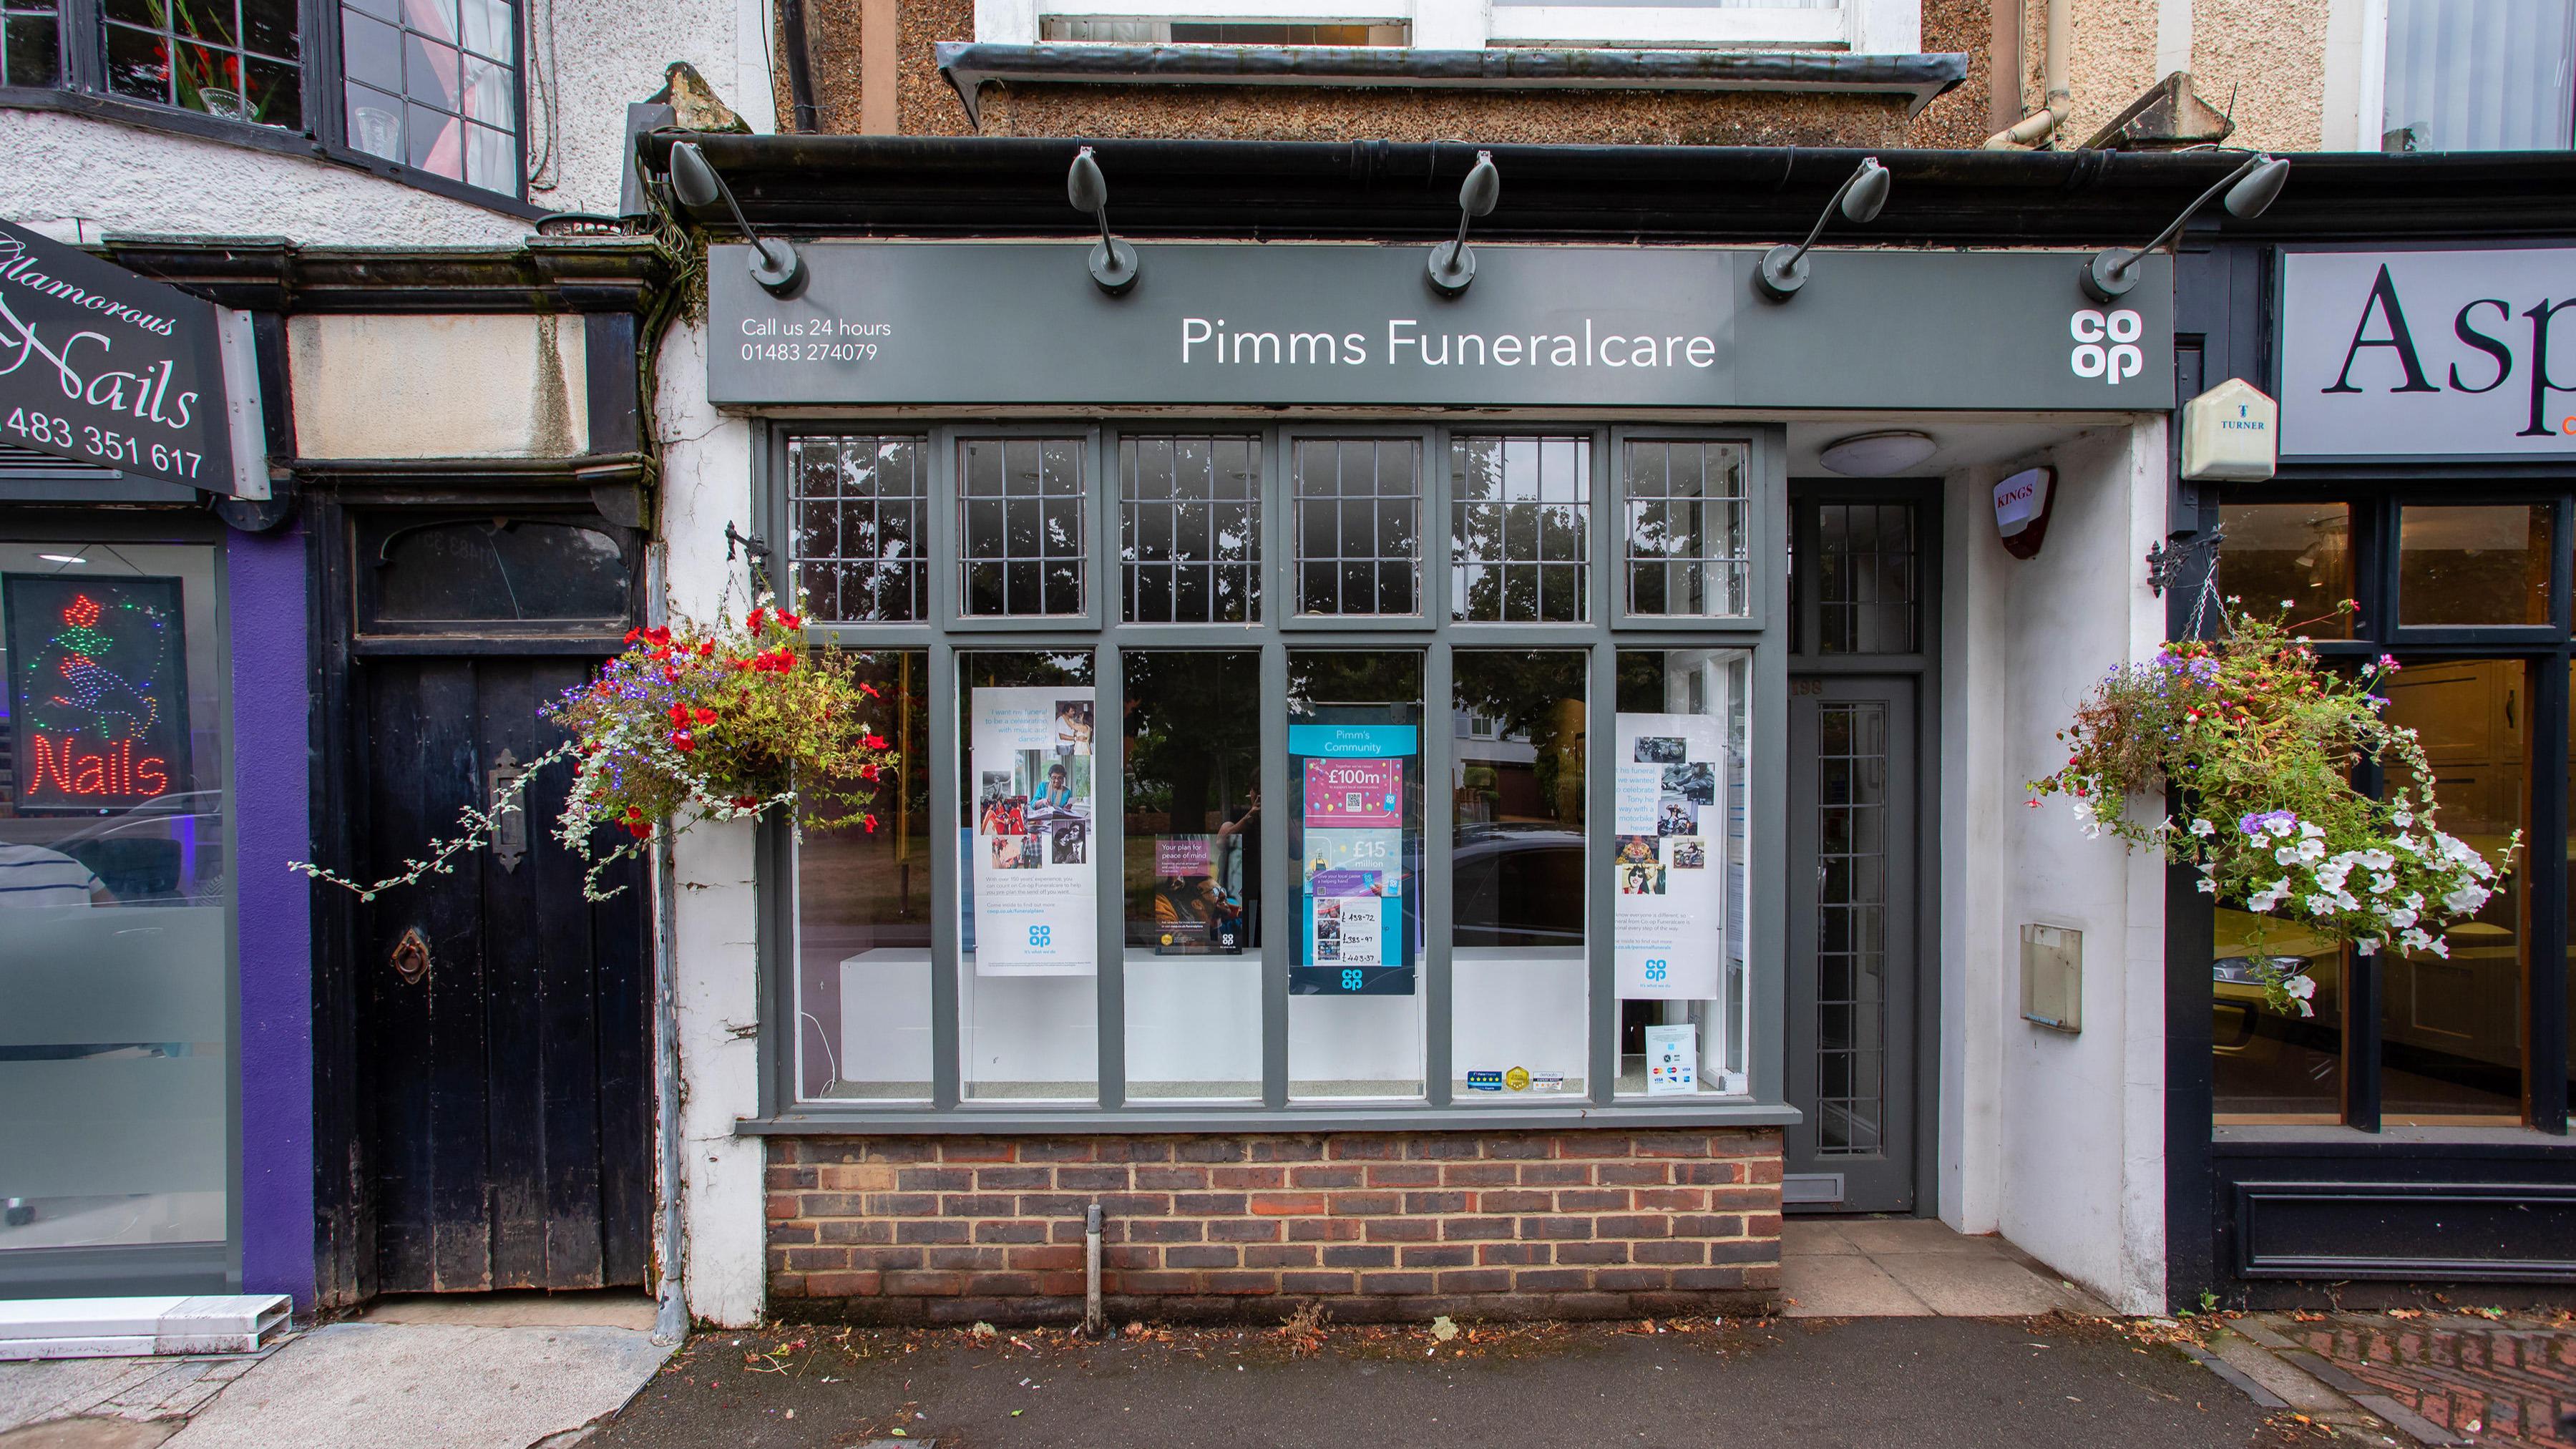 Images Pimms Funeralcare